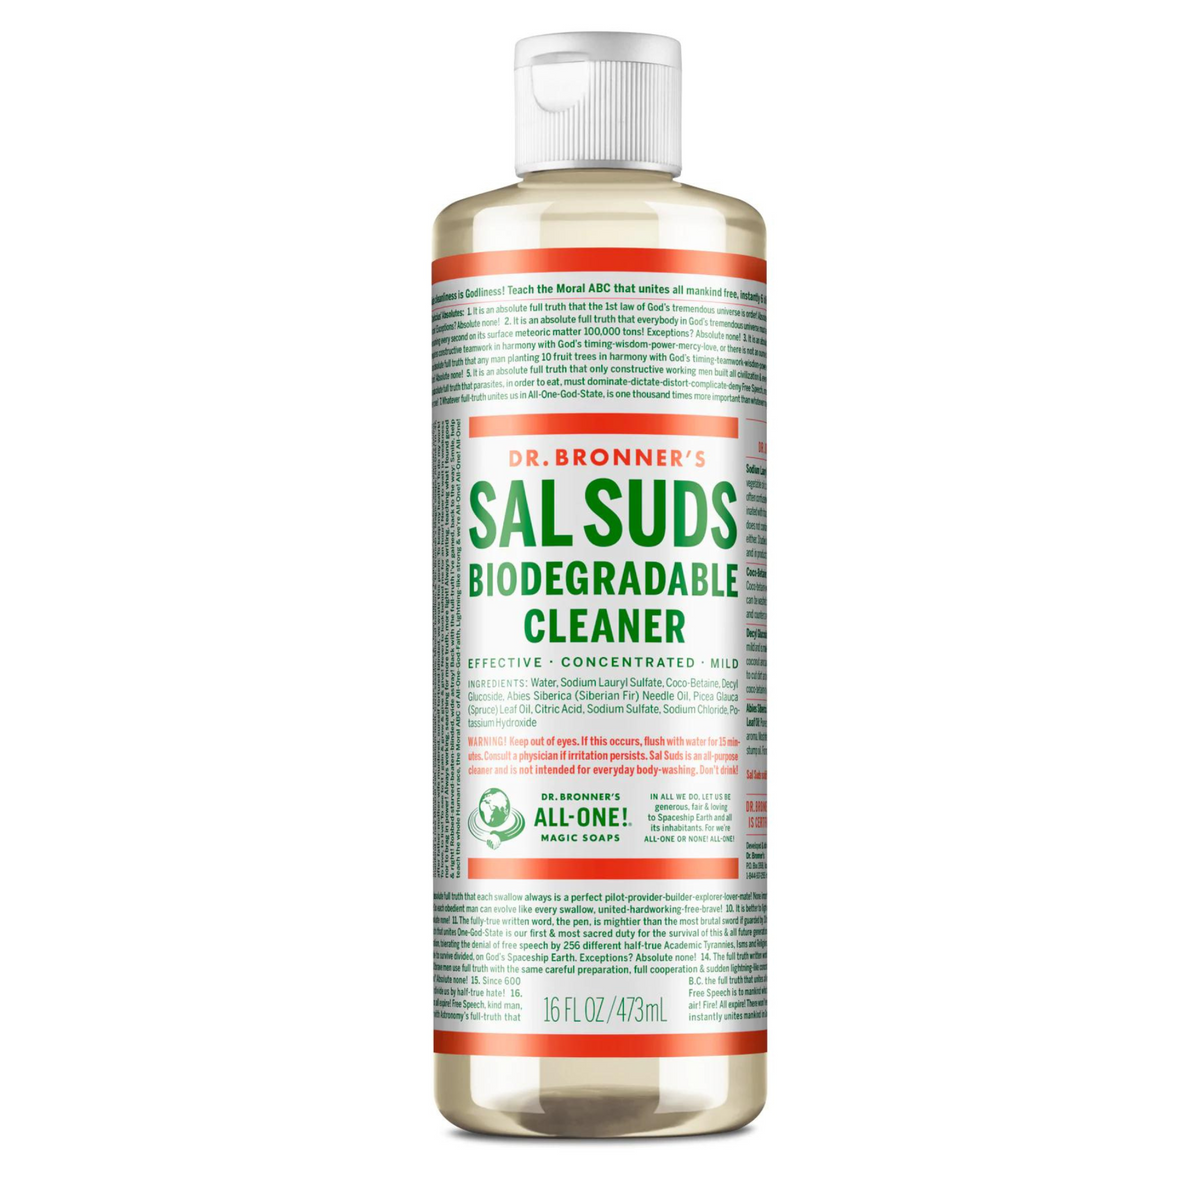 Primary Image of Dr. Bronner's Sal Suds Biodegradable Cleaner (16 fl oz)